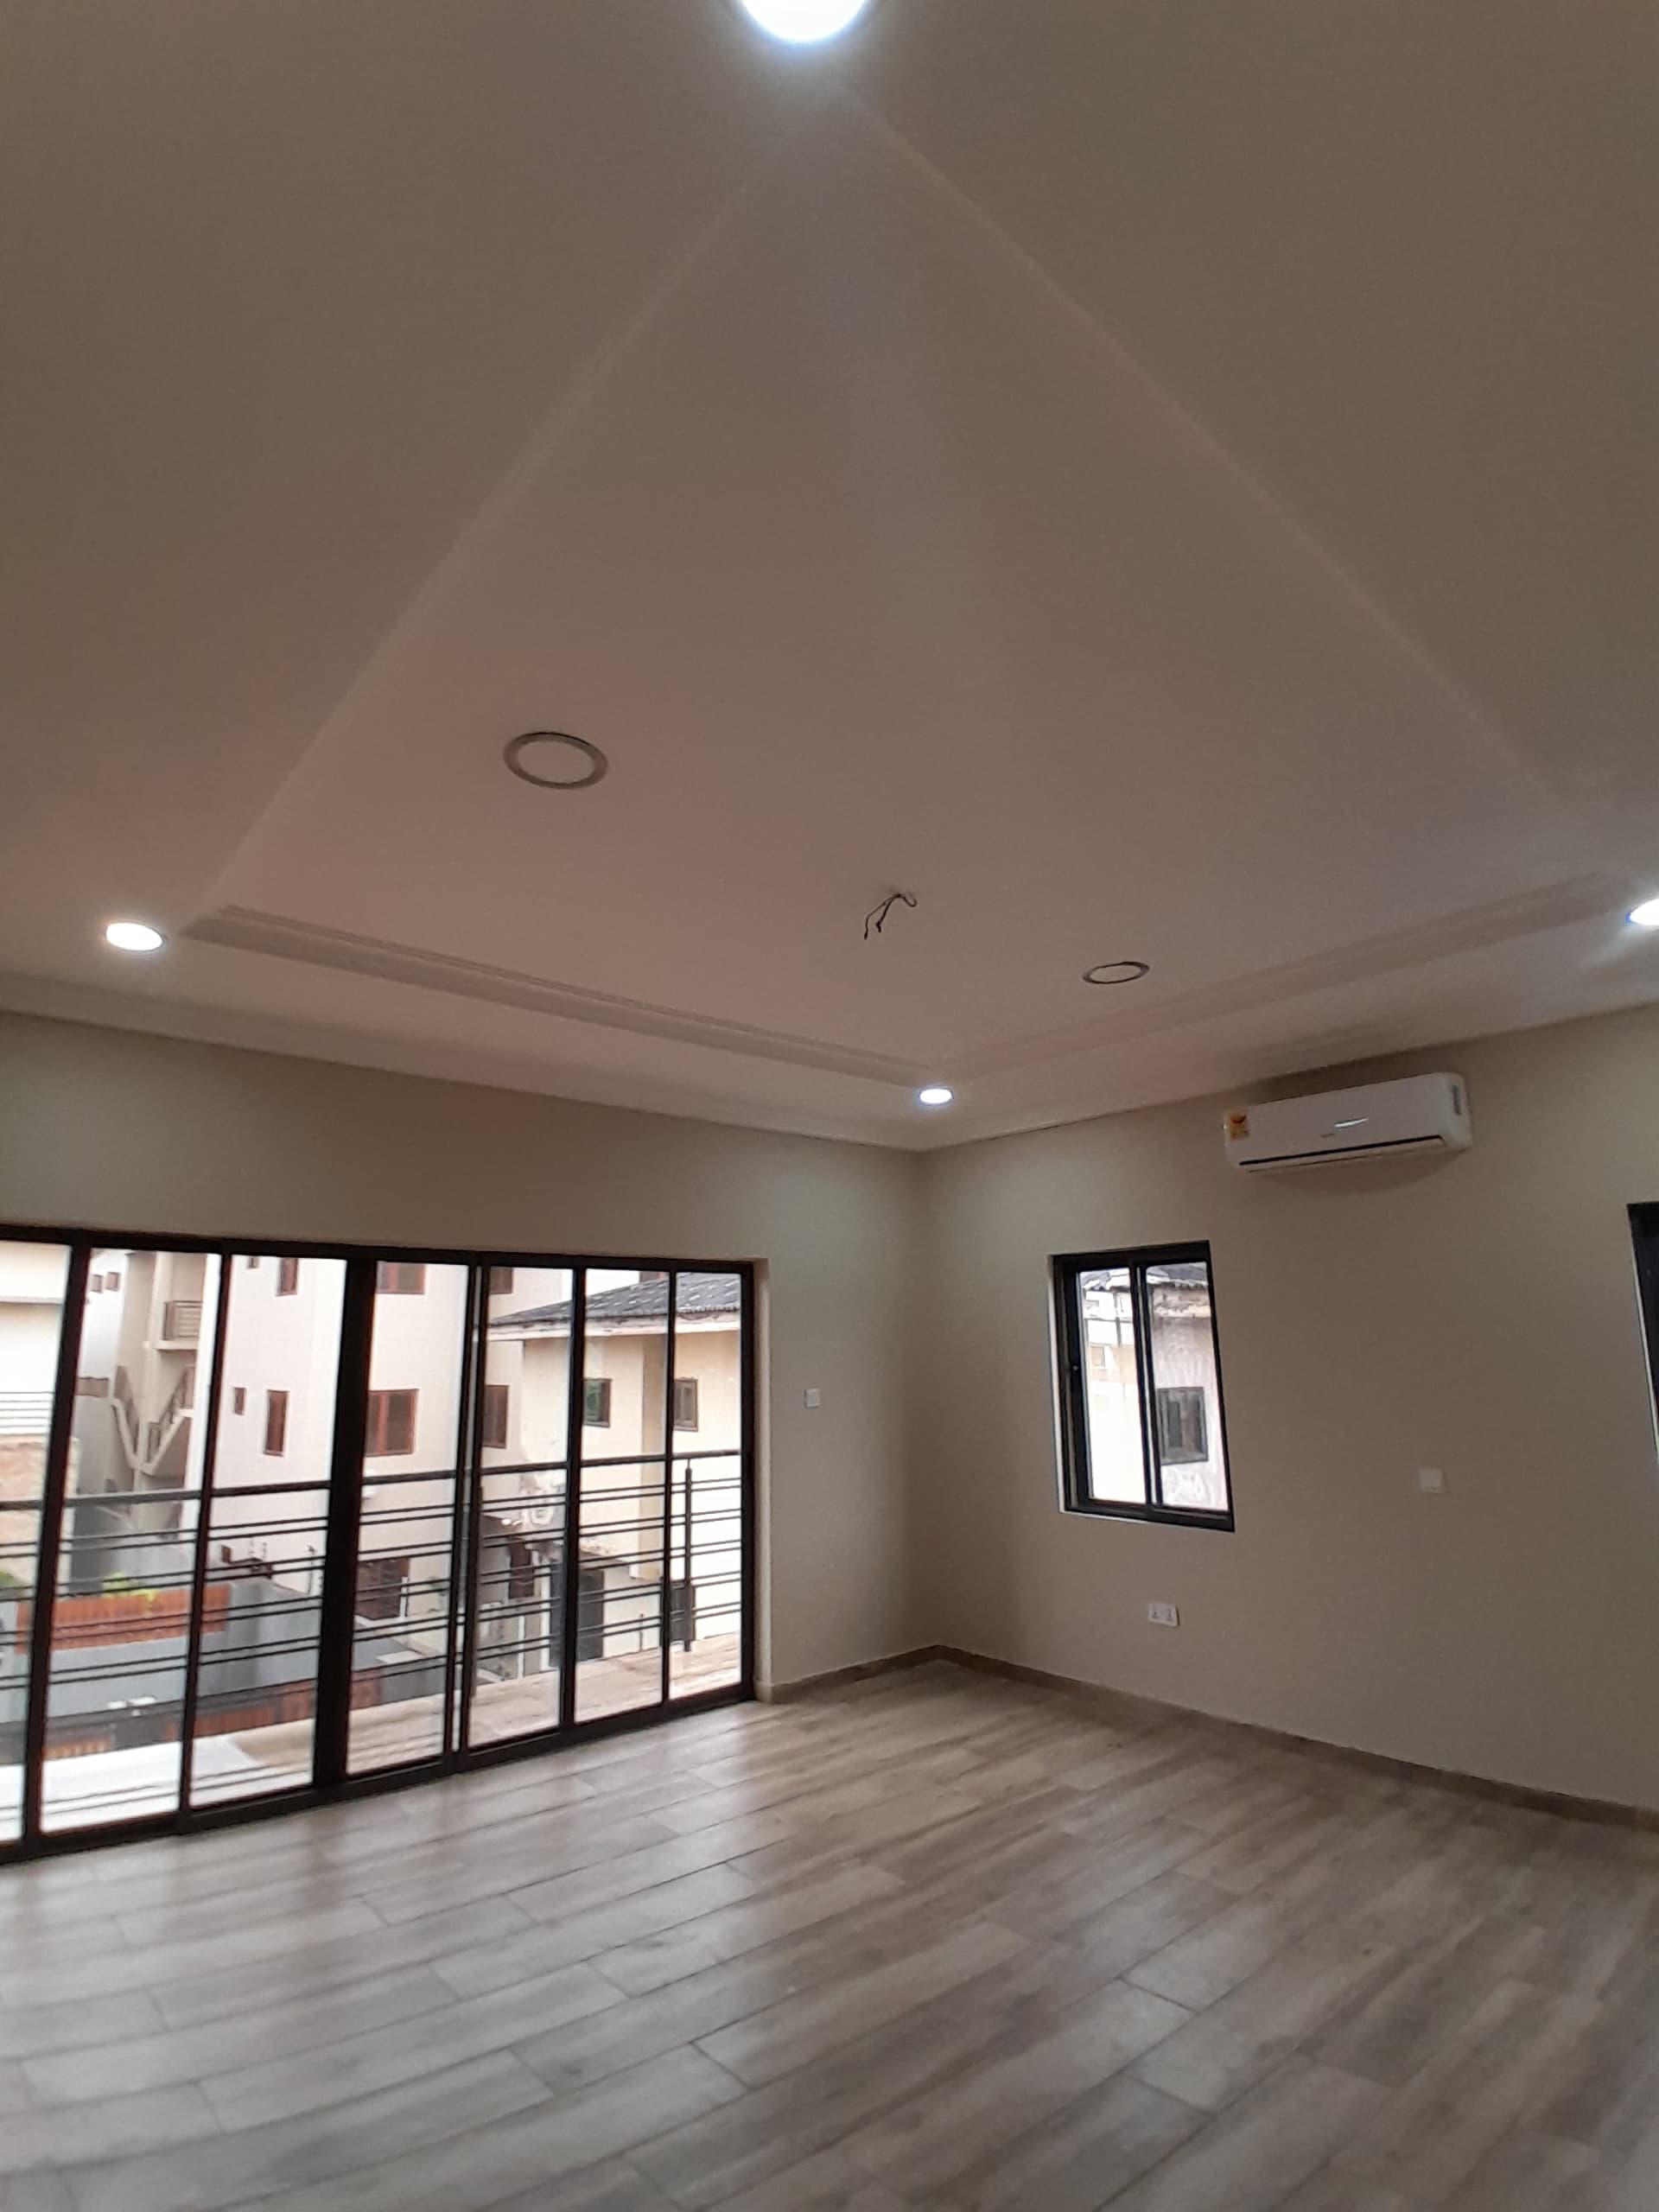 Three (3) Bedroom Detached House for Rent at Ajiringanor